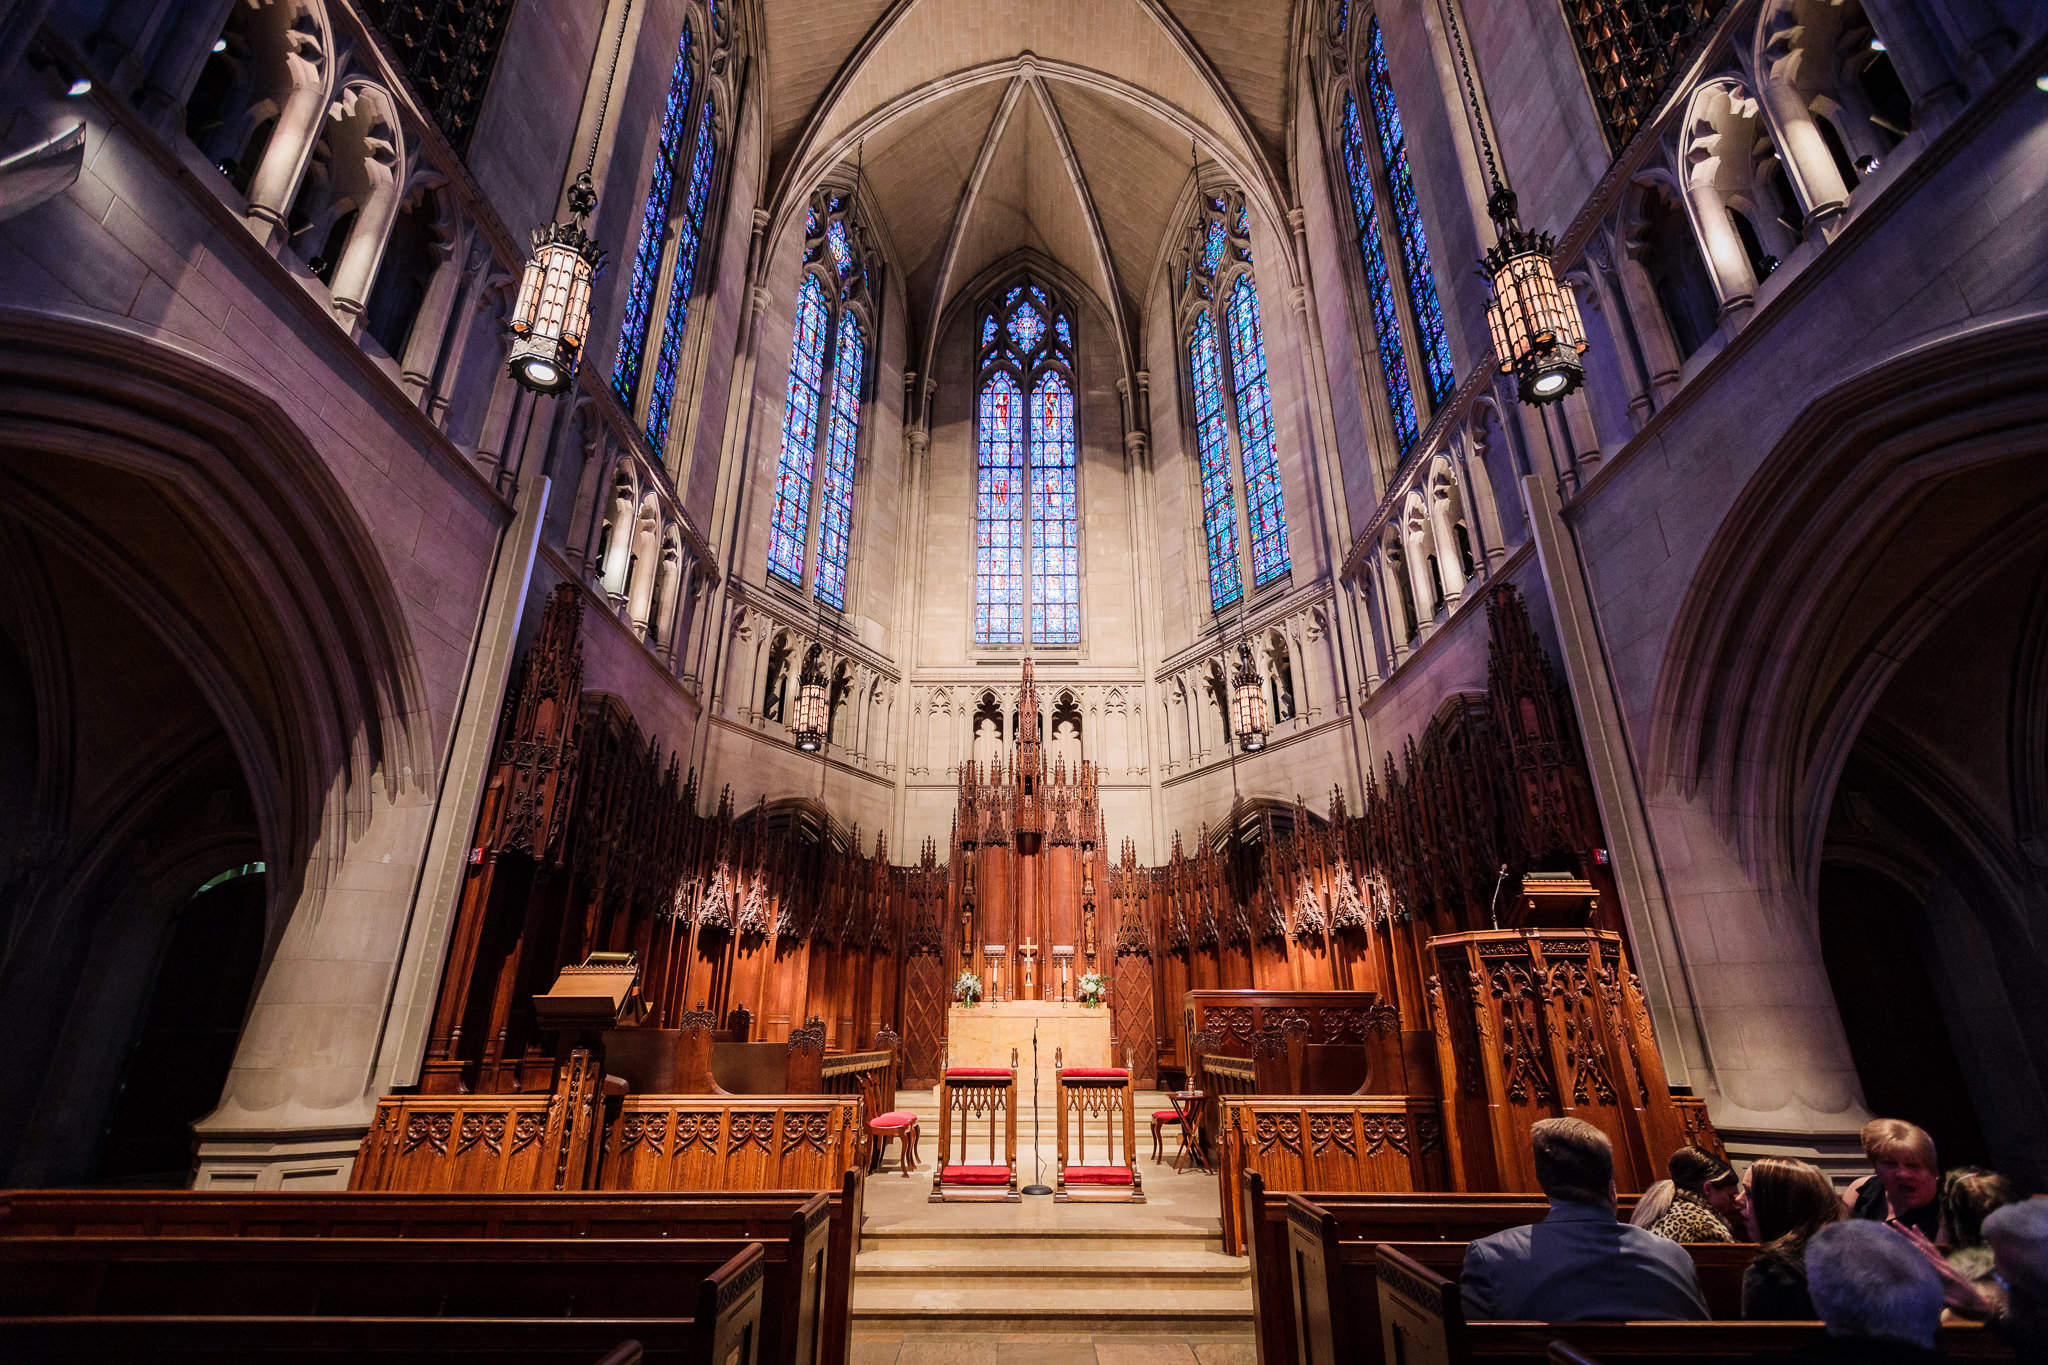 The altar of Heinz Memorial Chapel in Pittsburgh, PA